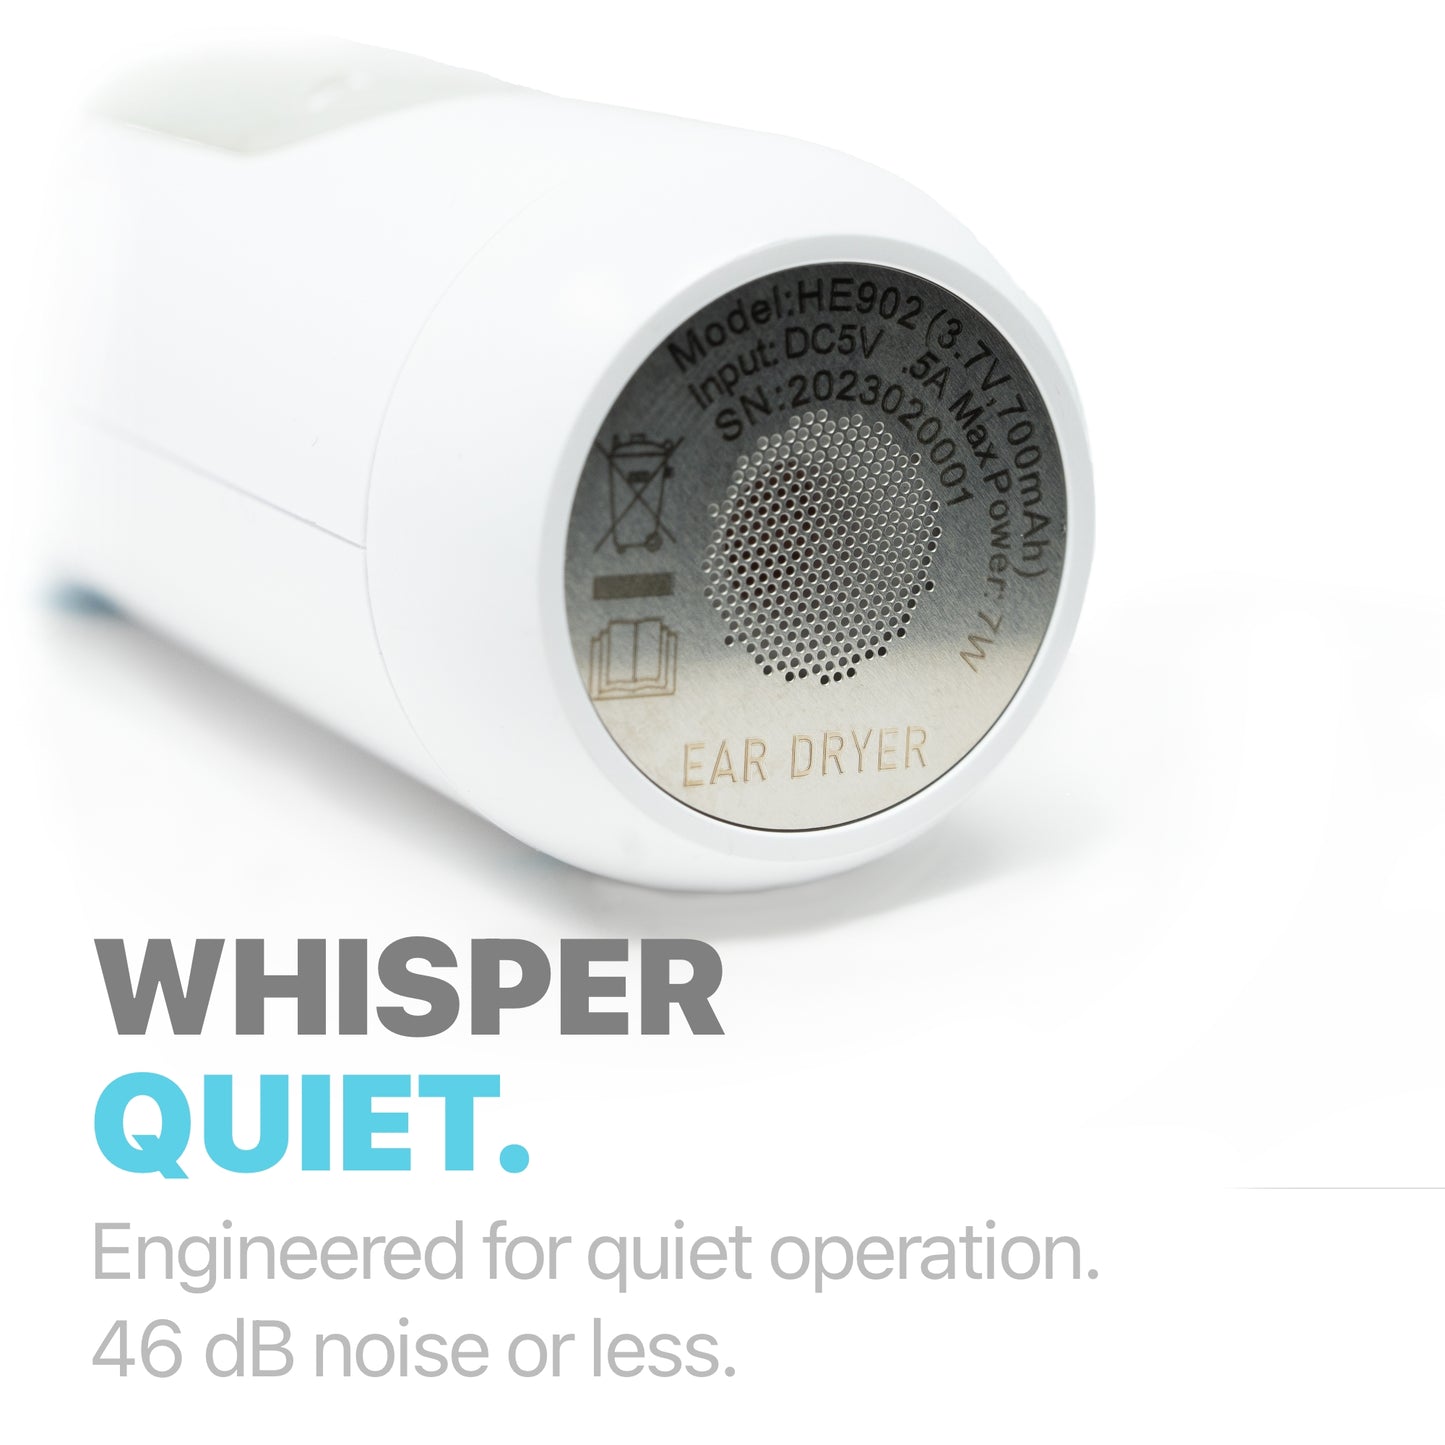 Whisper ear dryer is engineered to be quiet while drying ears.